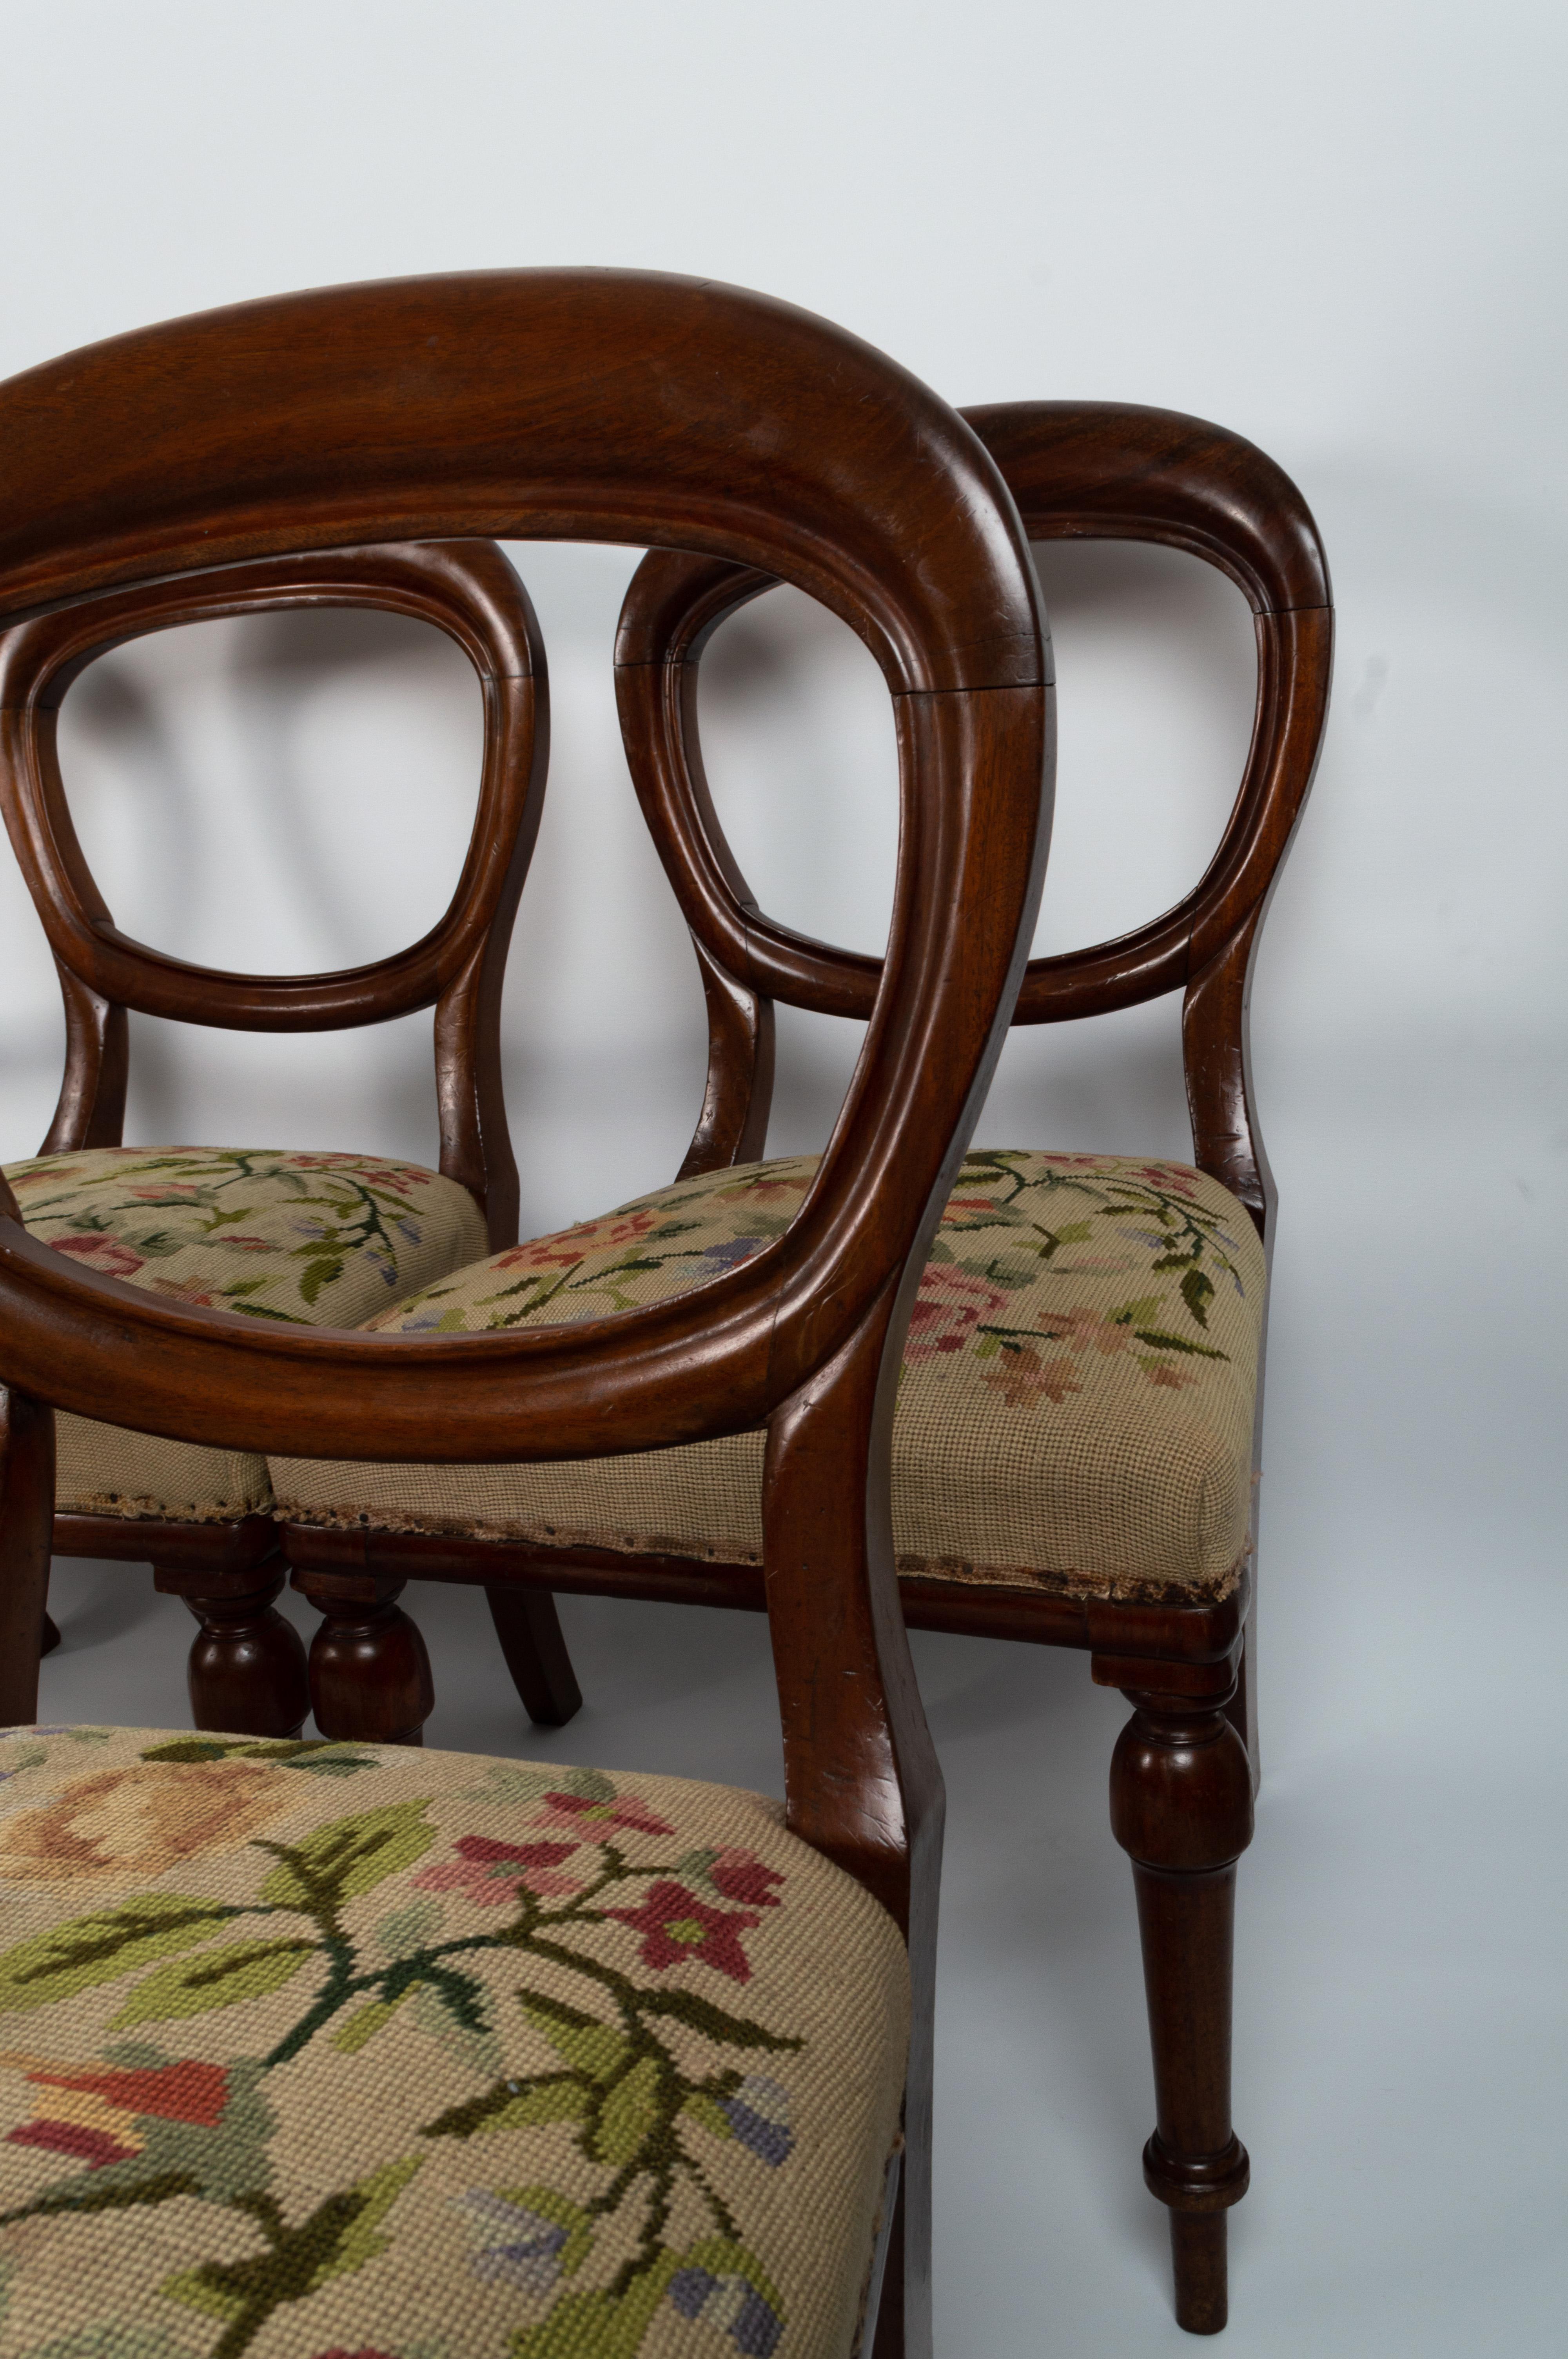 Set of Six Antique English 19th Century Mahogany Balloon Back Chairs circa 1860 For Sale 11